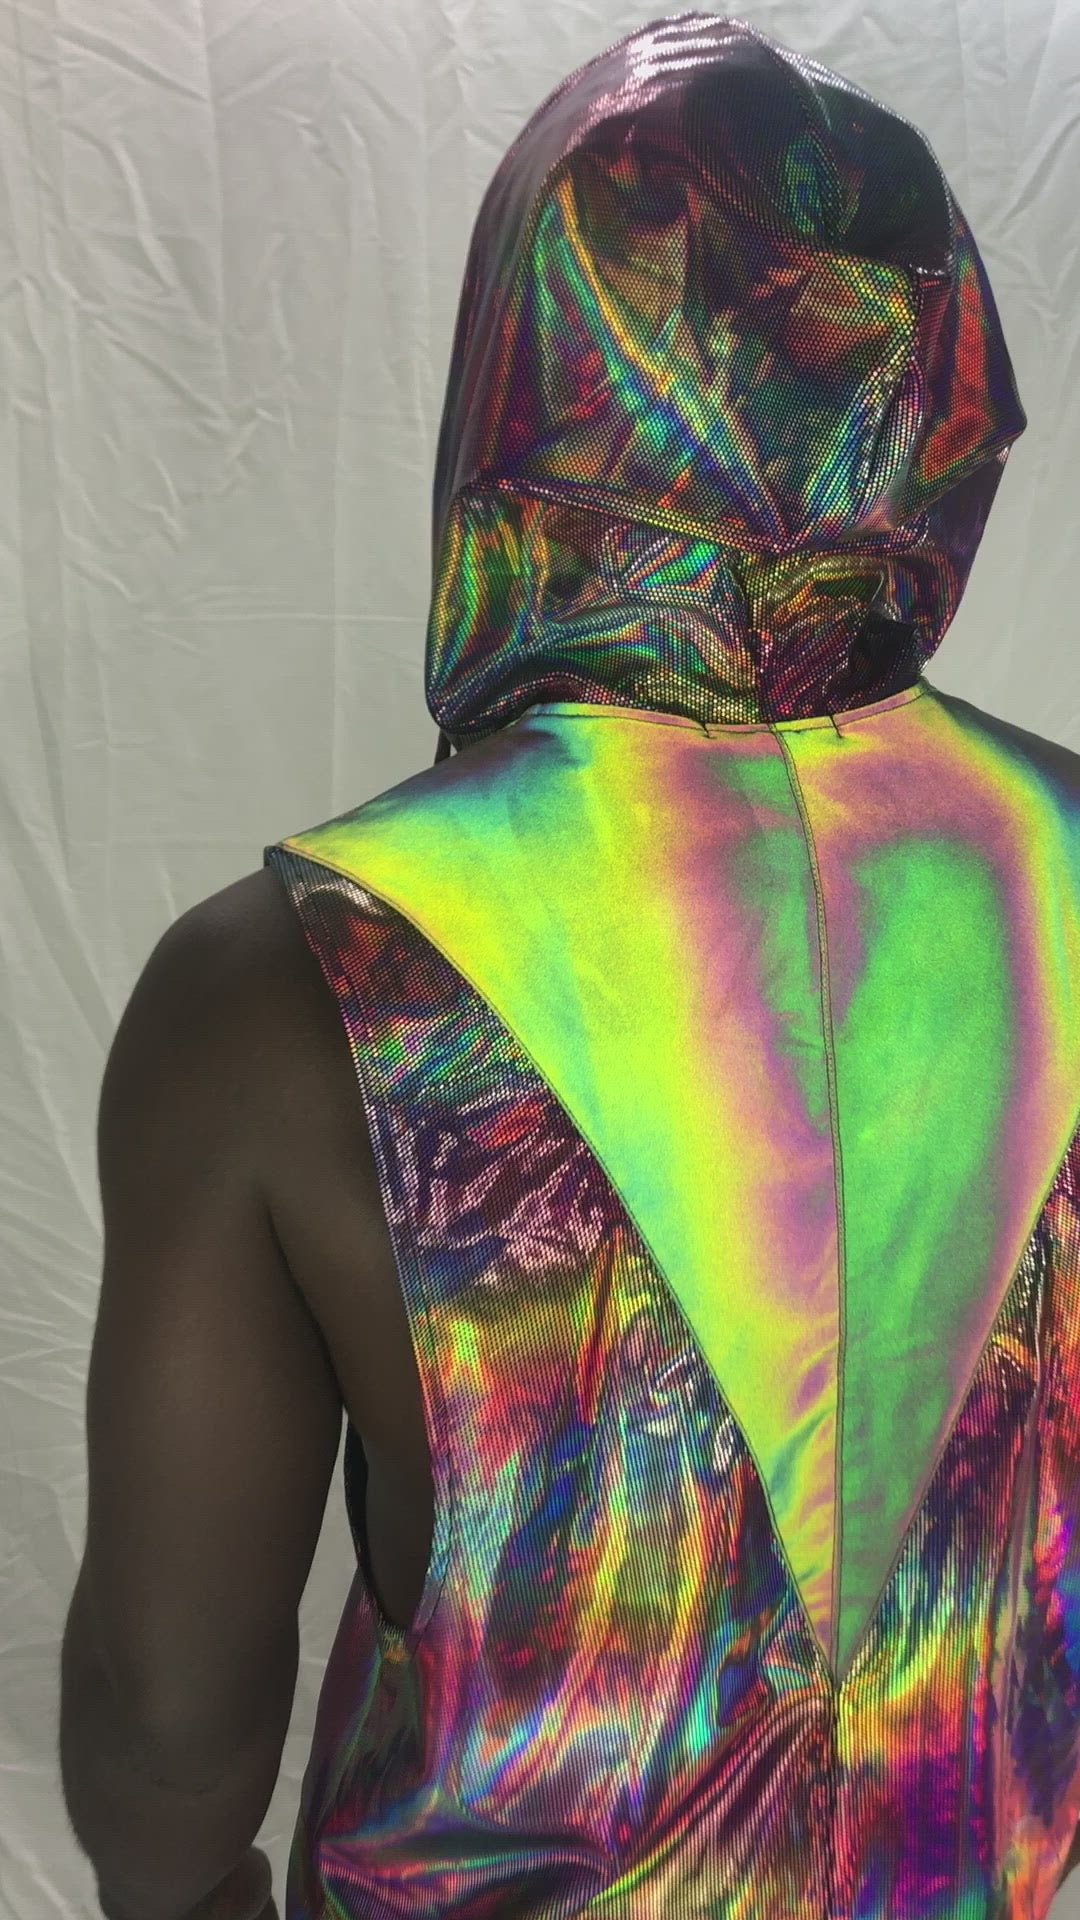 Holographic Rainbow Reflective Mens rave shirt with hood from Love Khaos Mens Festival Clothing Brand.